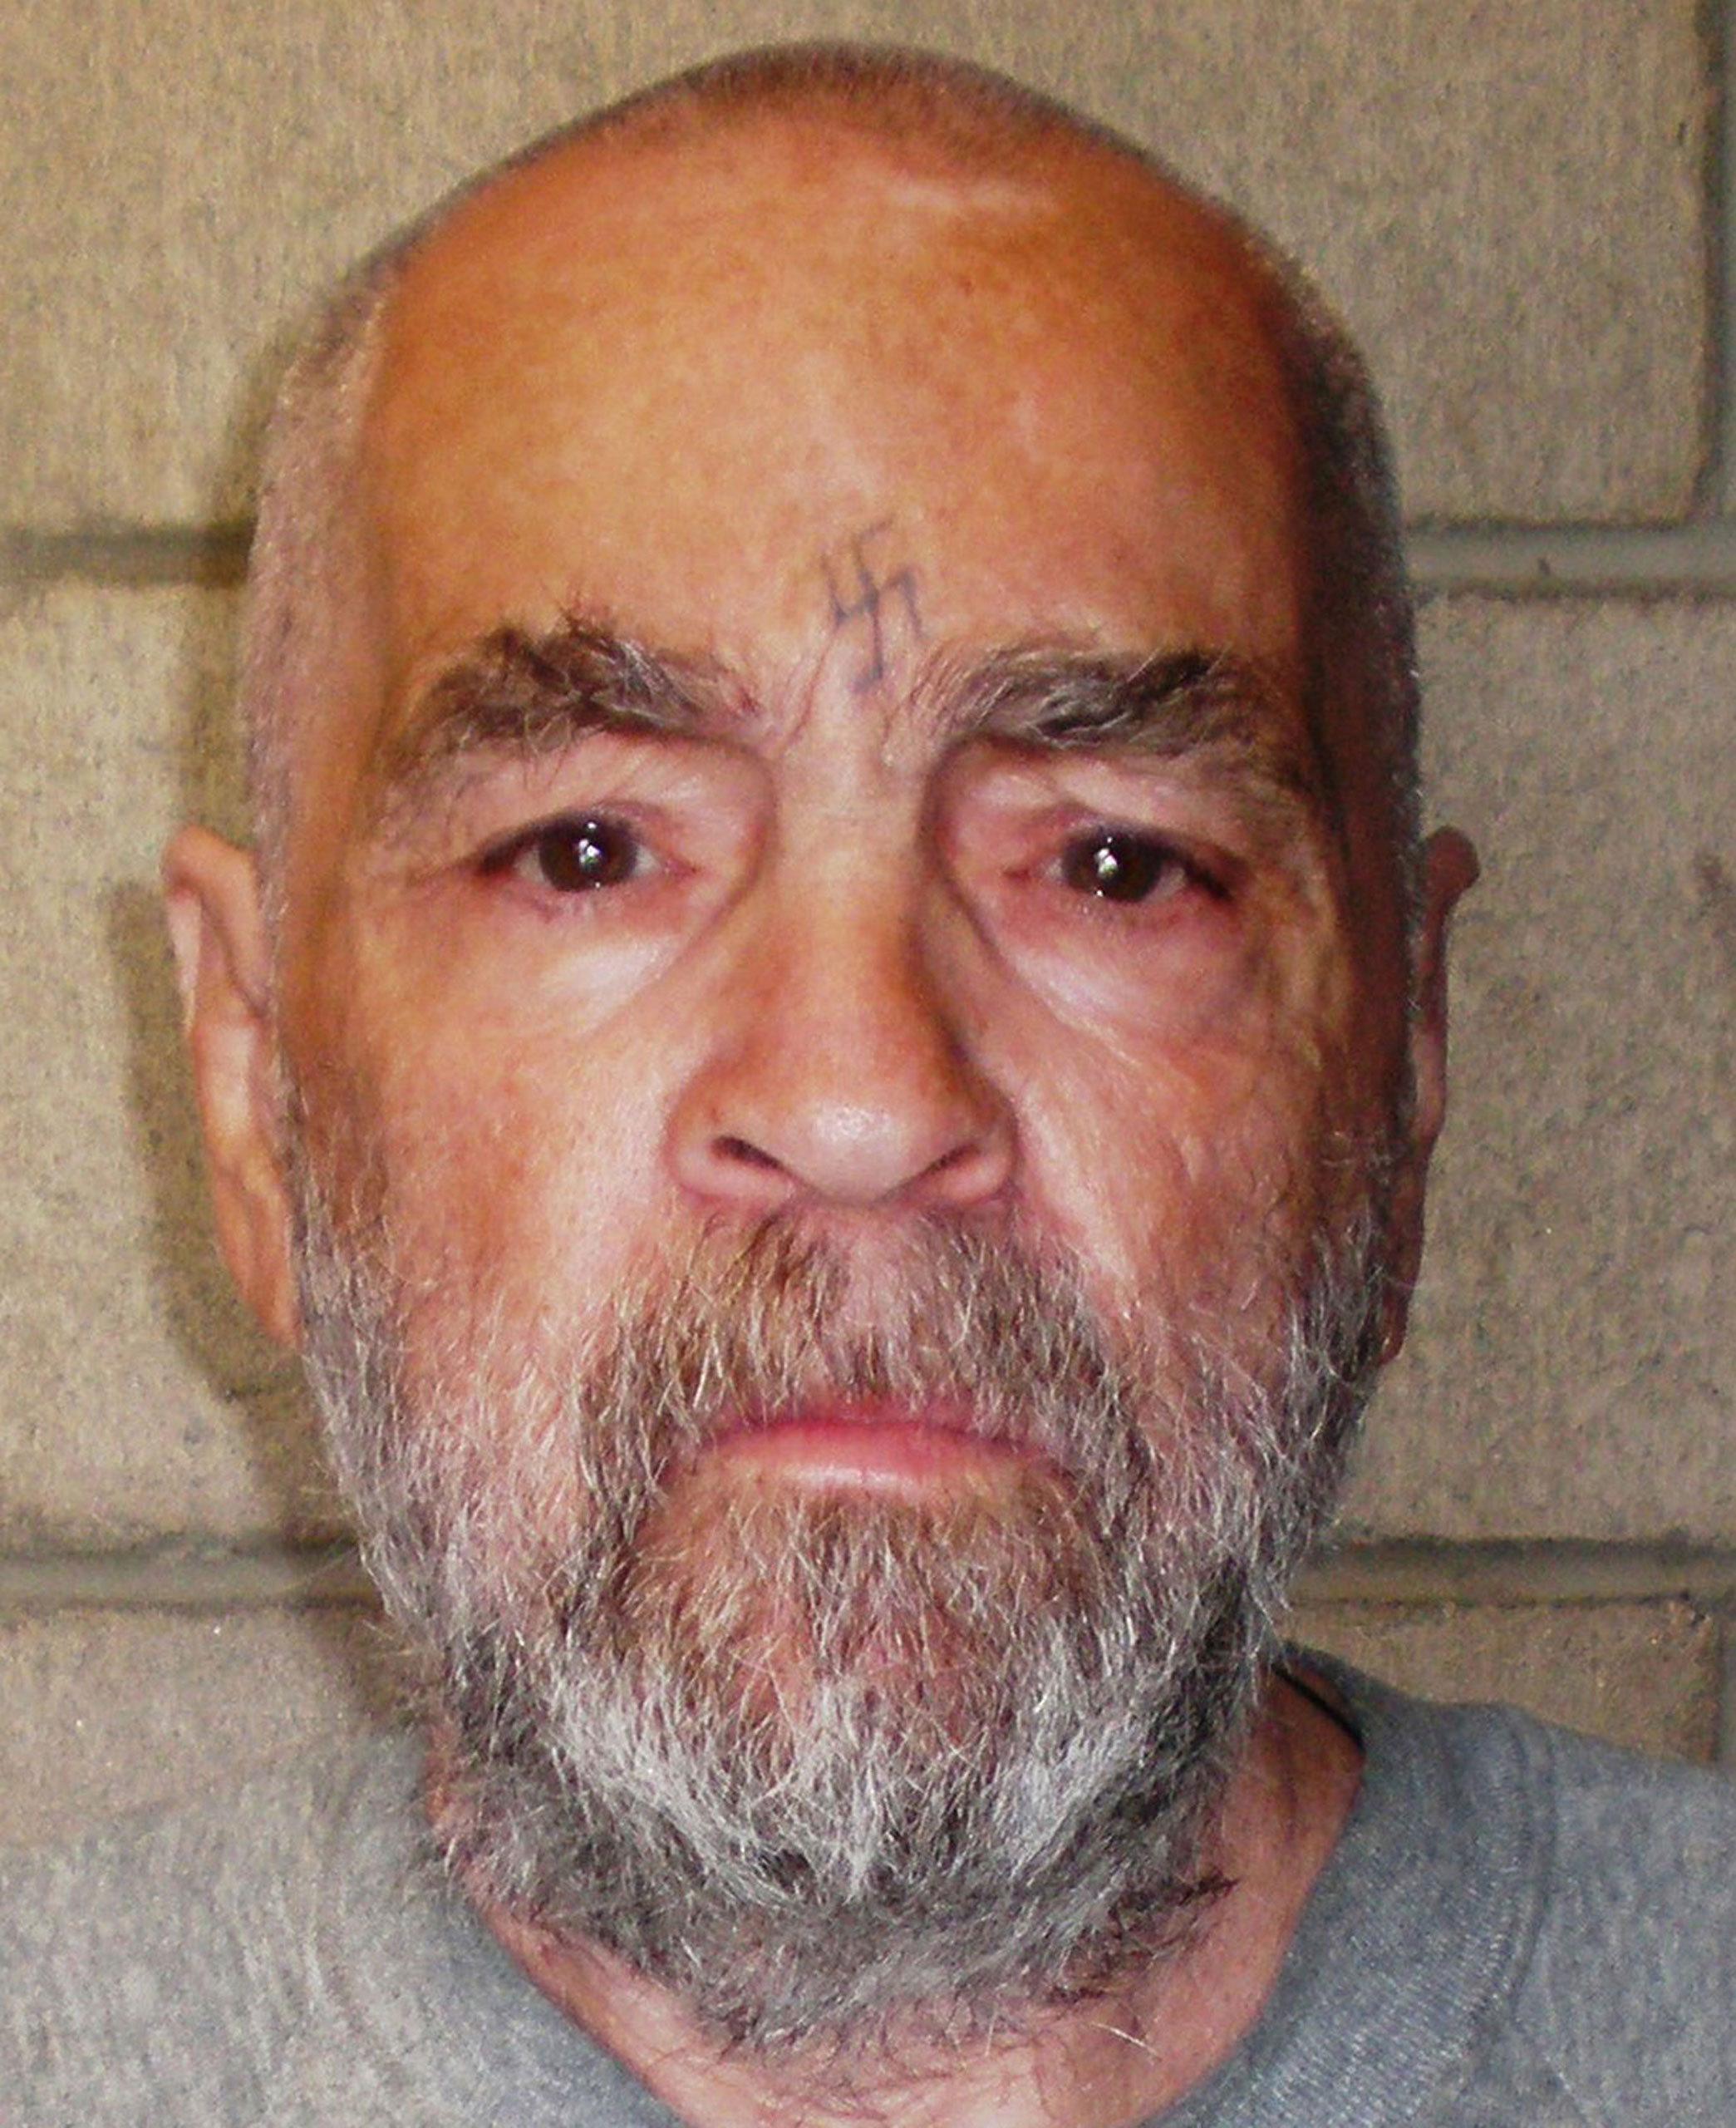 Manson, age 74, at Corcoran State Prison in California on March 18, 2009. The picture was taken as a regular update of the prison's files.